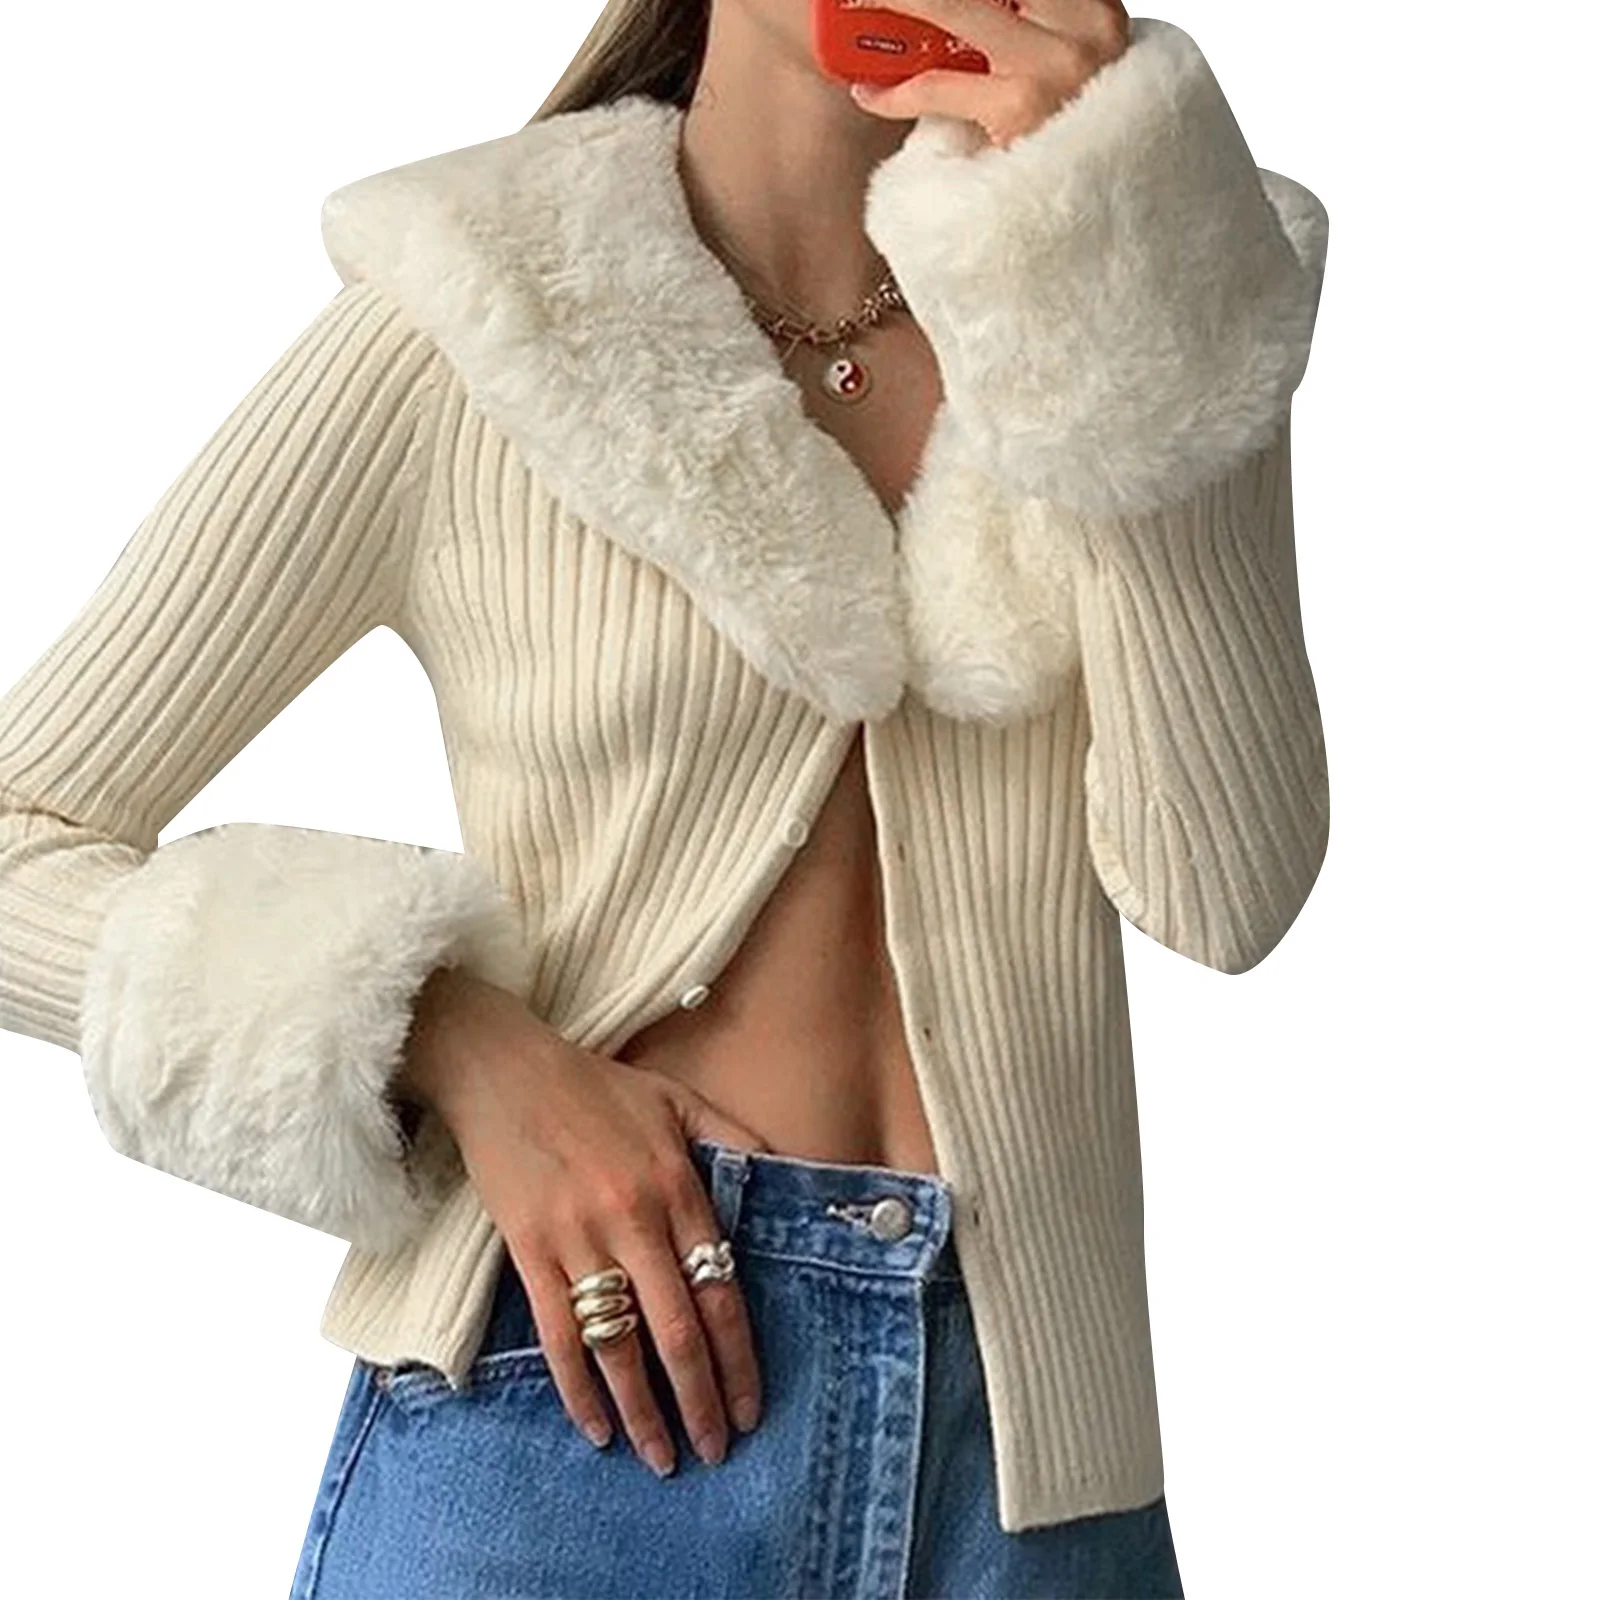 

Women Fluffy Long Sleeve V-Neck Cropped Knit Cardigan Sweaters Pullover Tops with Faux Fur Trim Collar Cuffs